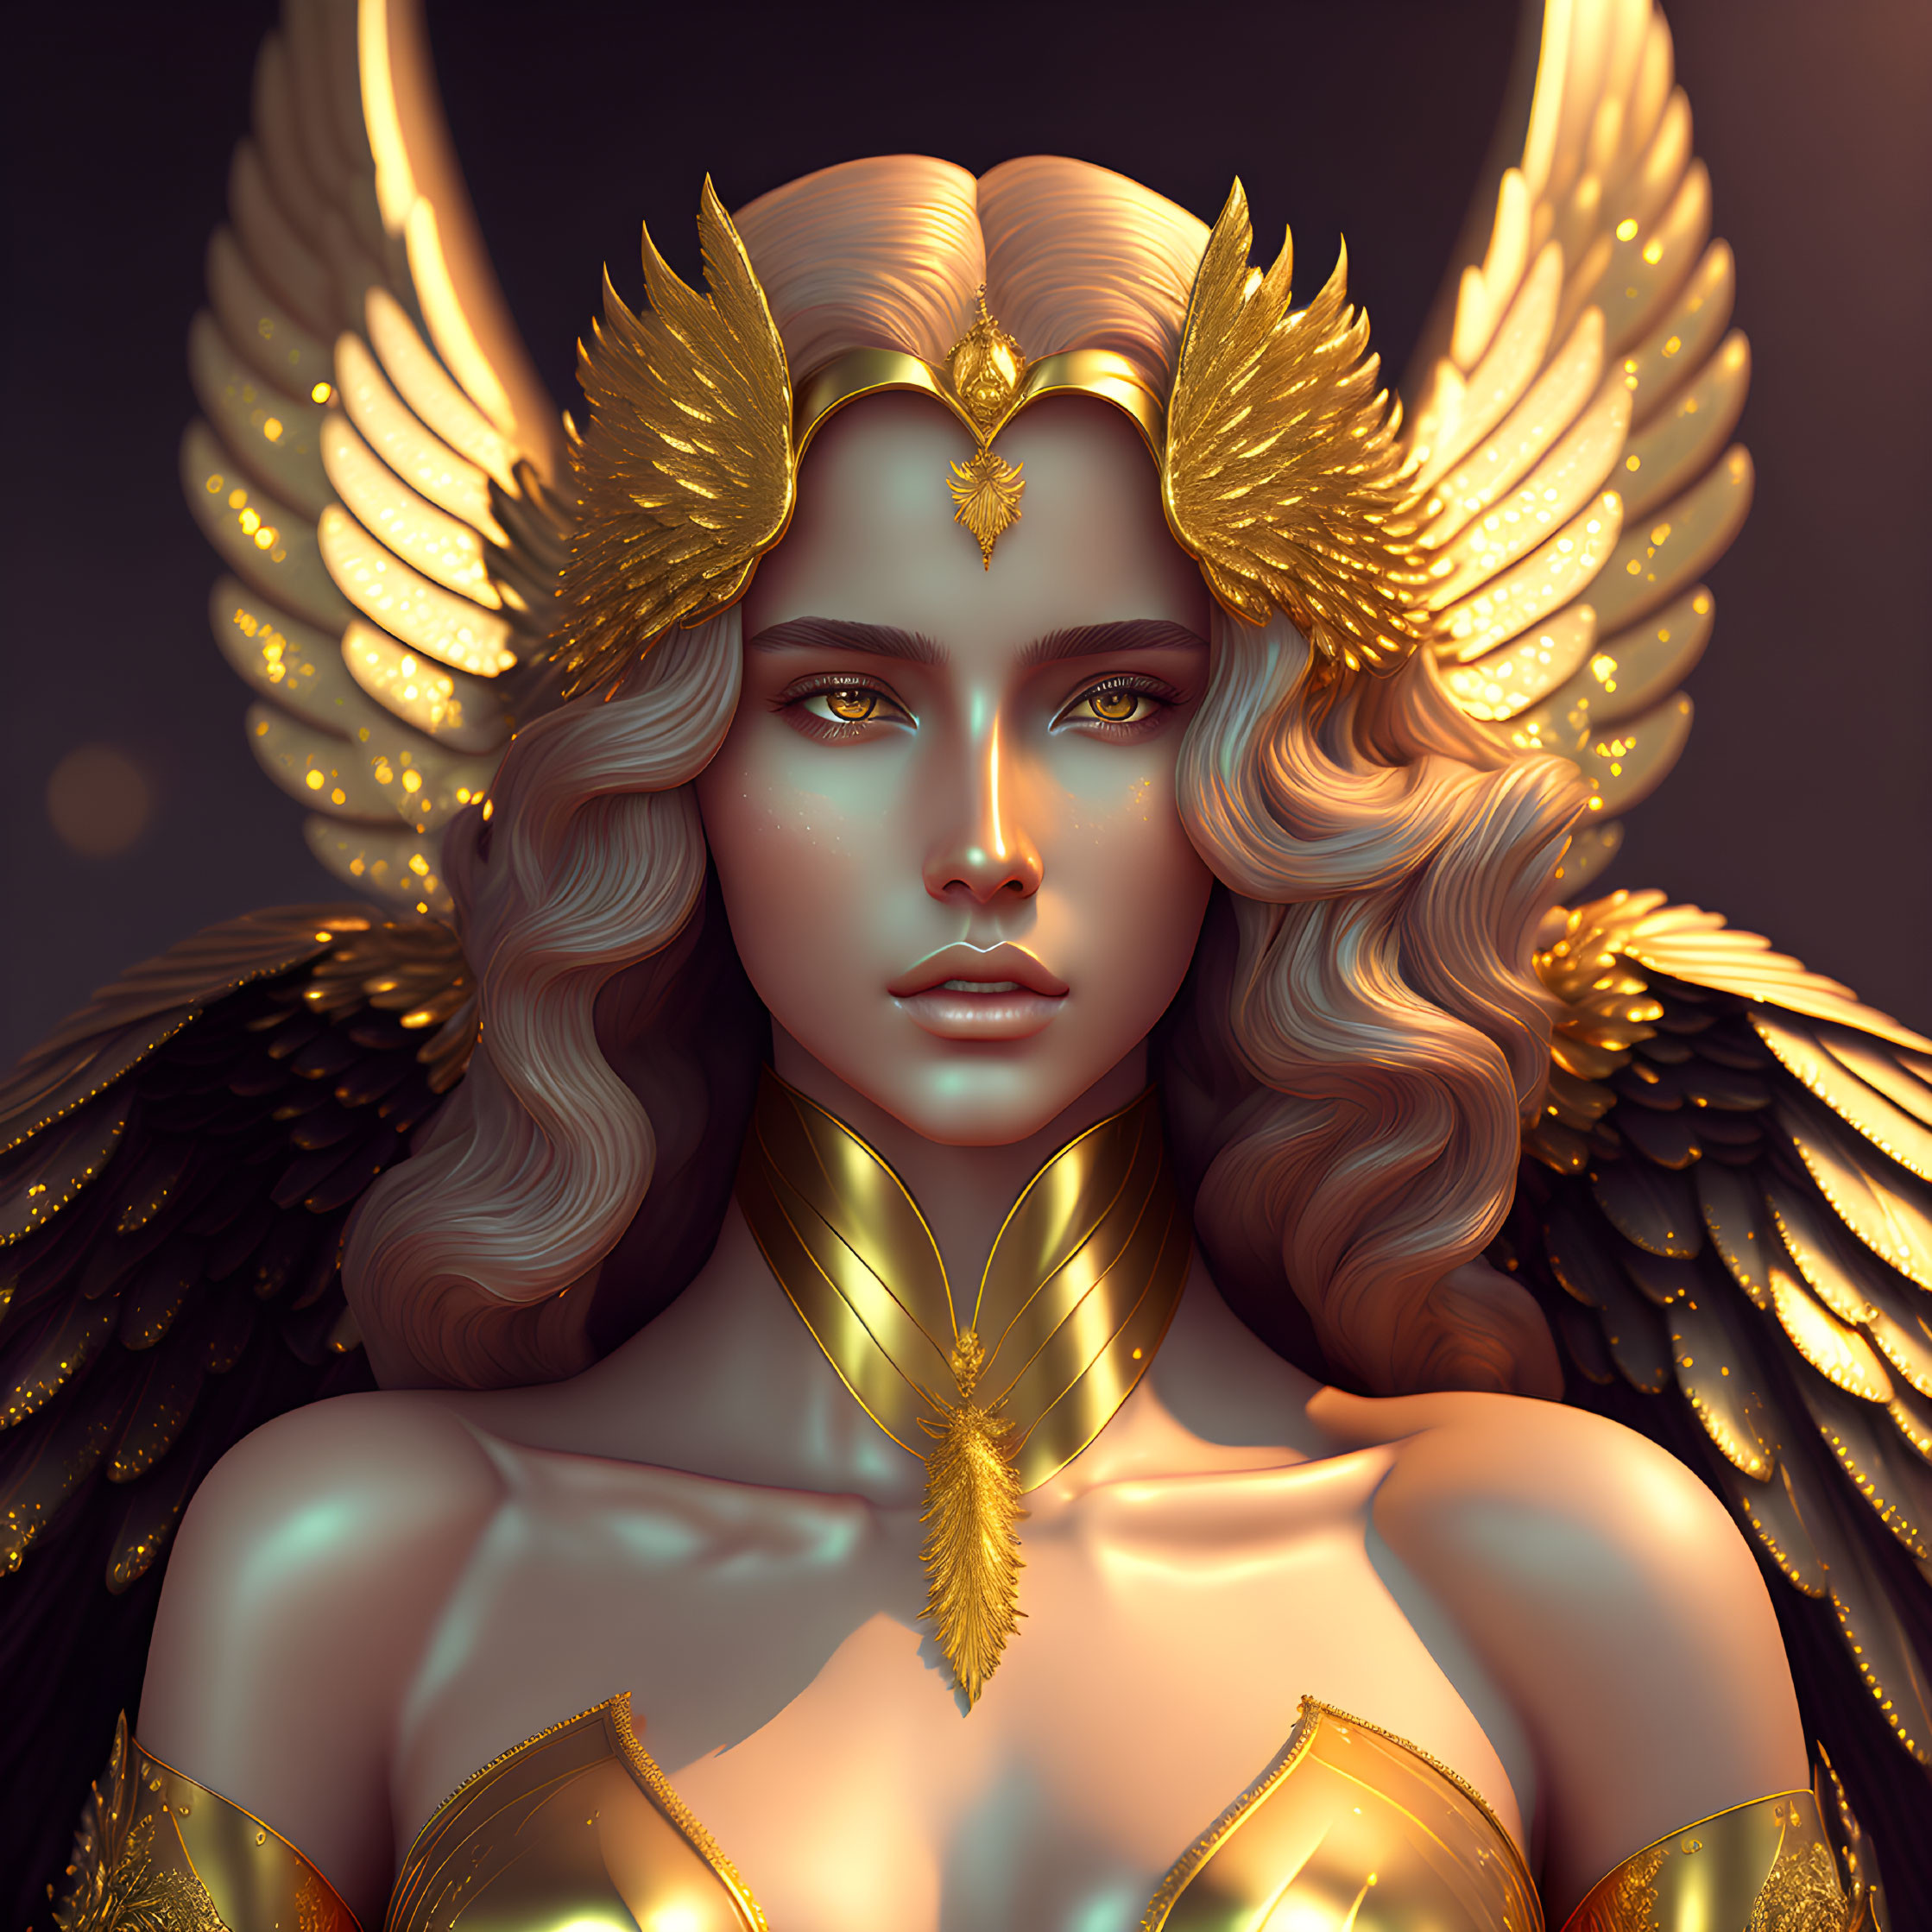 Fantasy-inspired illustration of a woman with gold feathered wings and armor